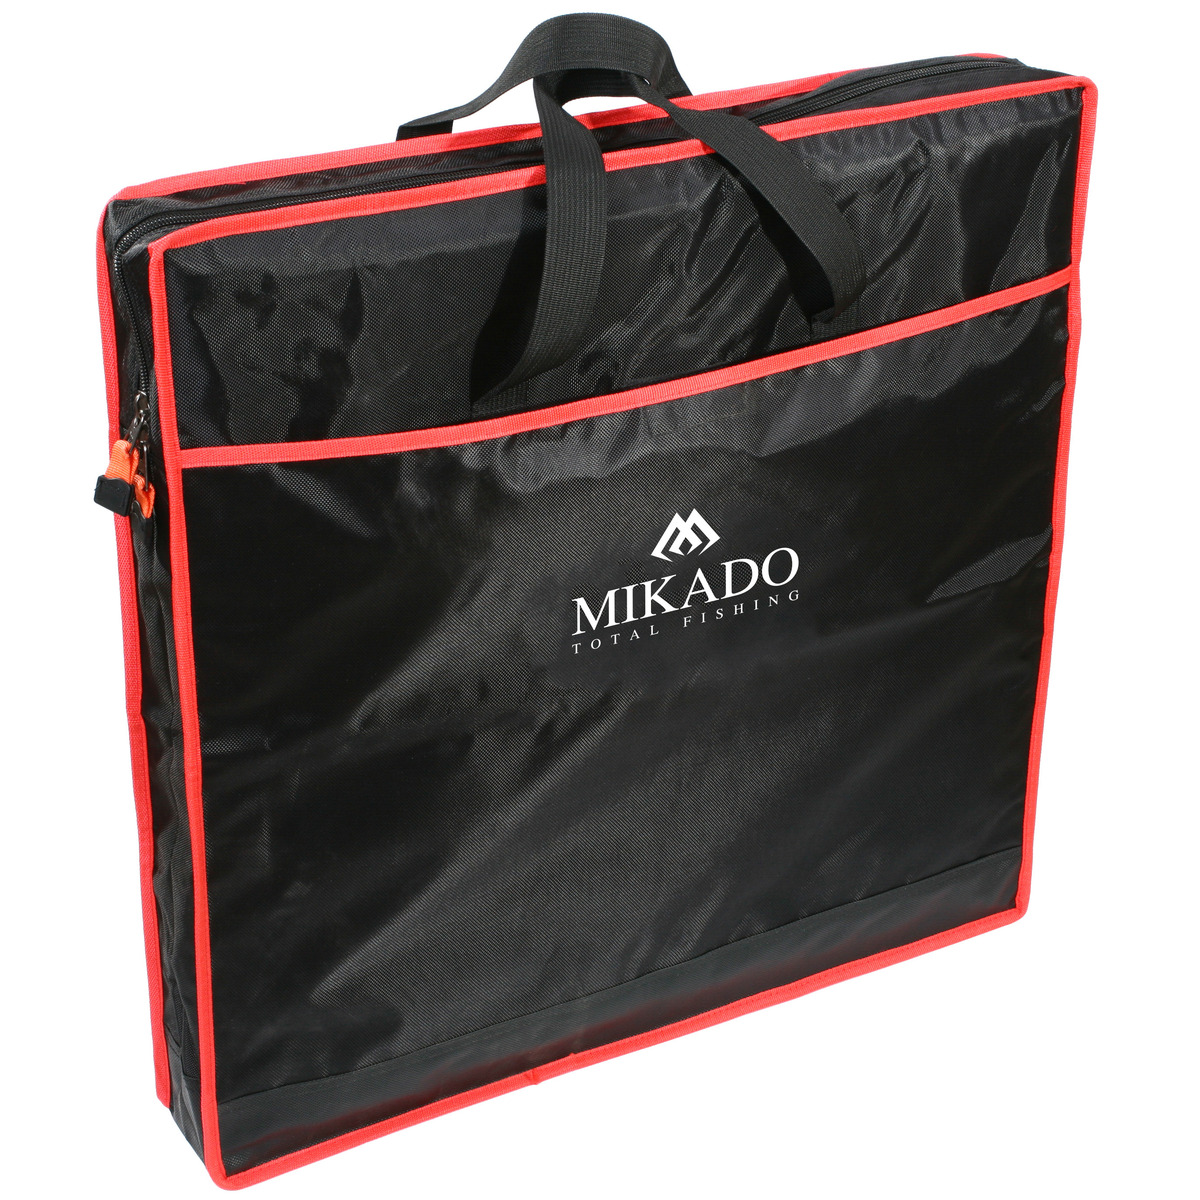 Mikado Bagfor Keepnets 1 Compartment - SQUARE (63x63x9 cm)  BLACK AND RED